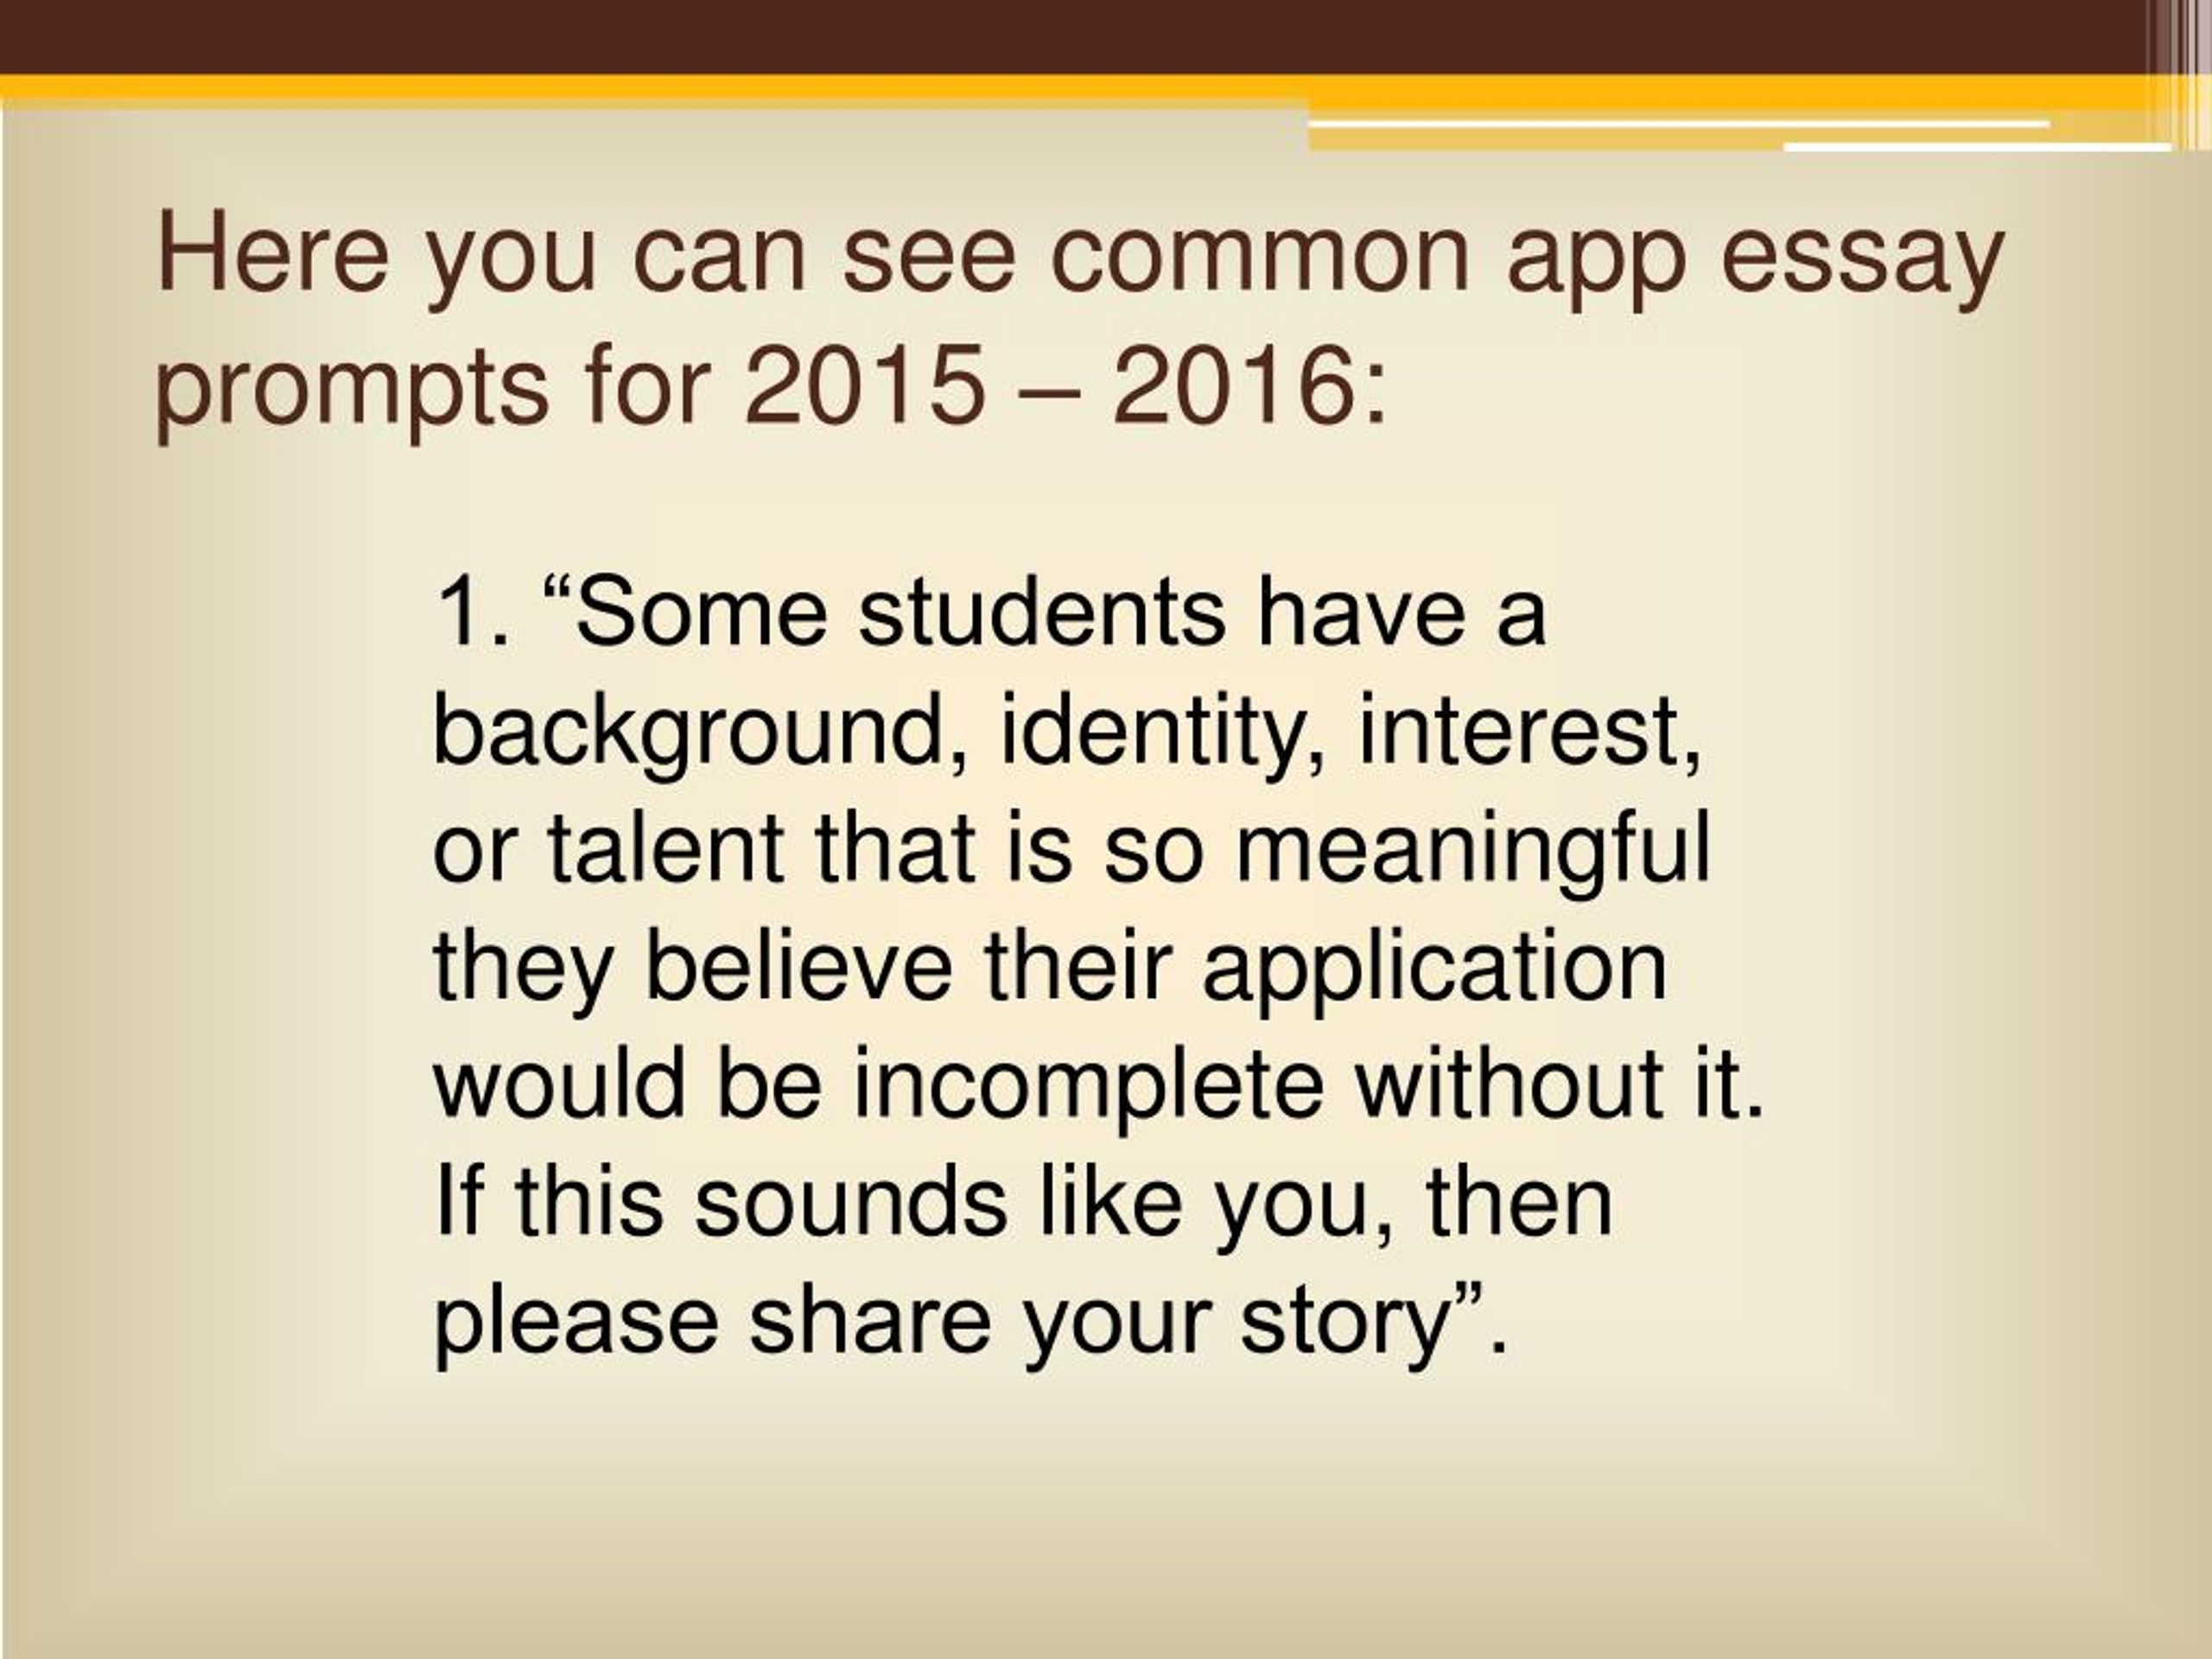 essay questions for common app